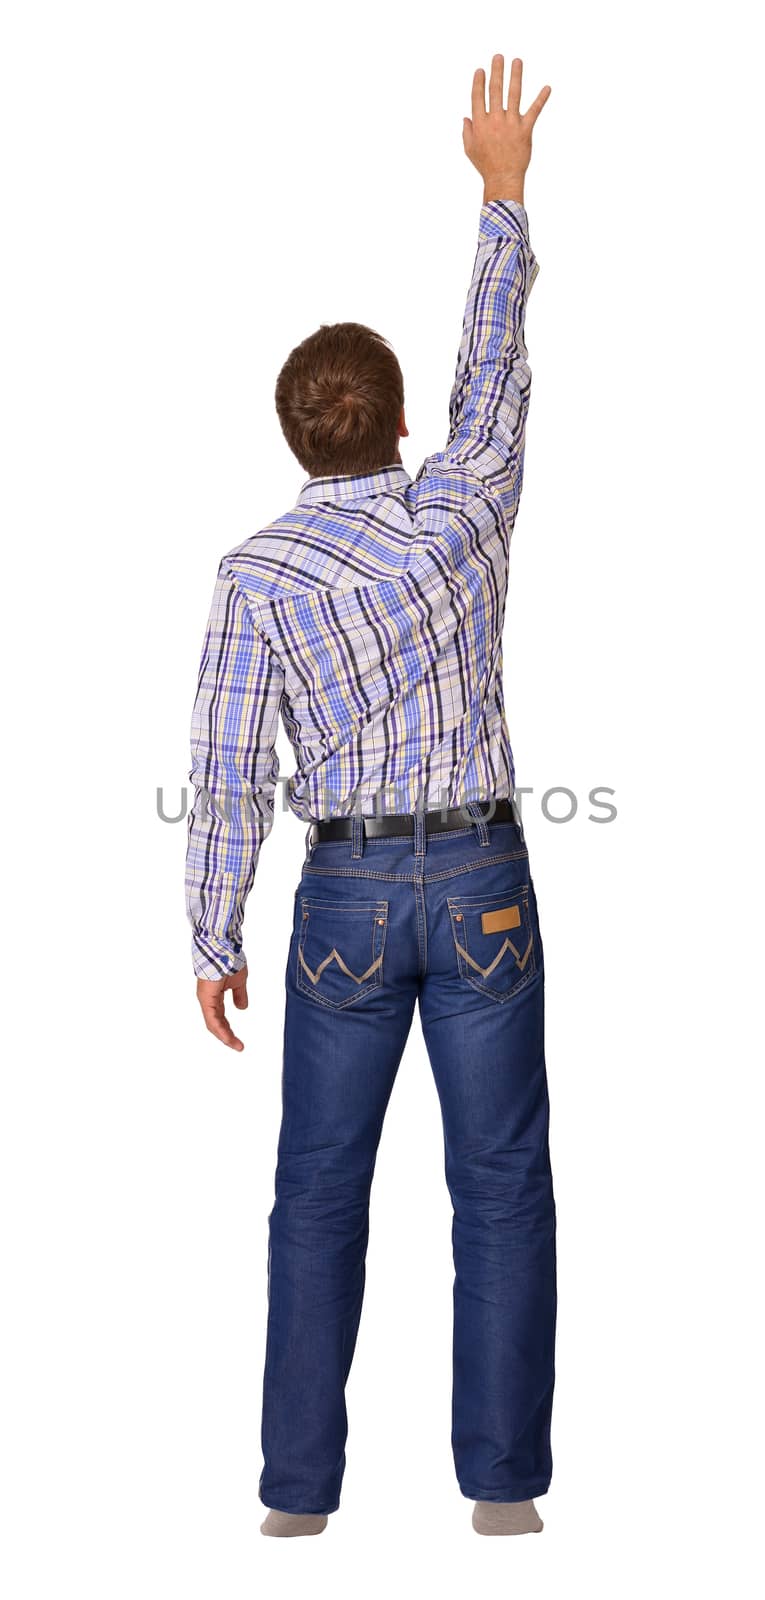 Portrait of a young man raised his hand up. Back view. White background